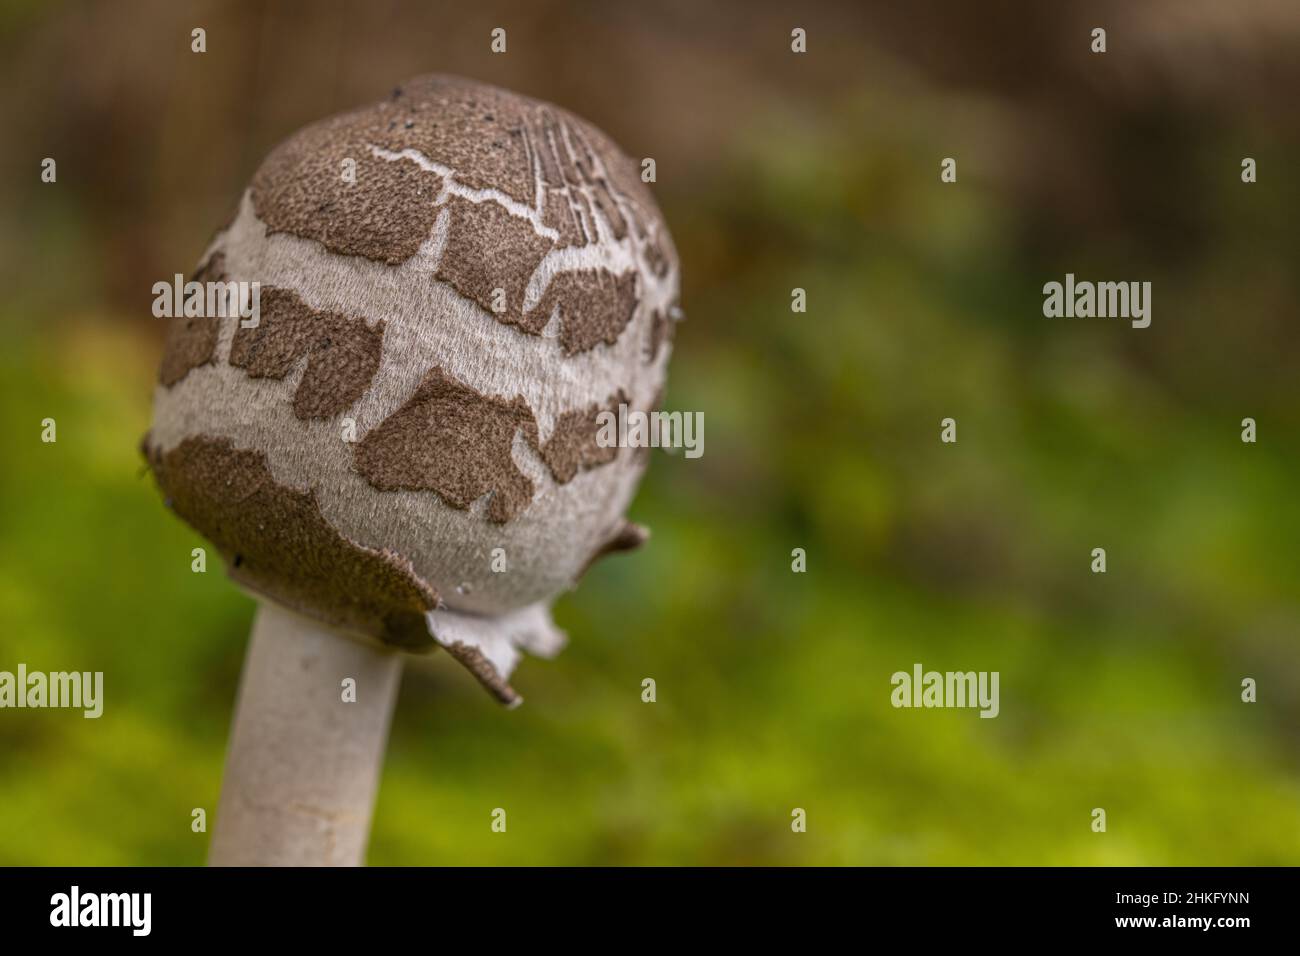 France, Somme, Crécy-en-Ponthieu, Crécy forest, Mushroom, Macrolepiota procera Stock Photo